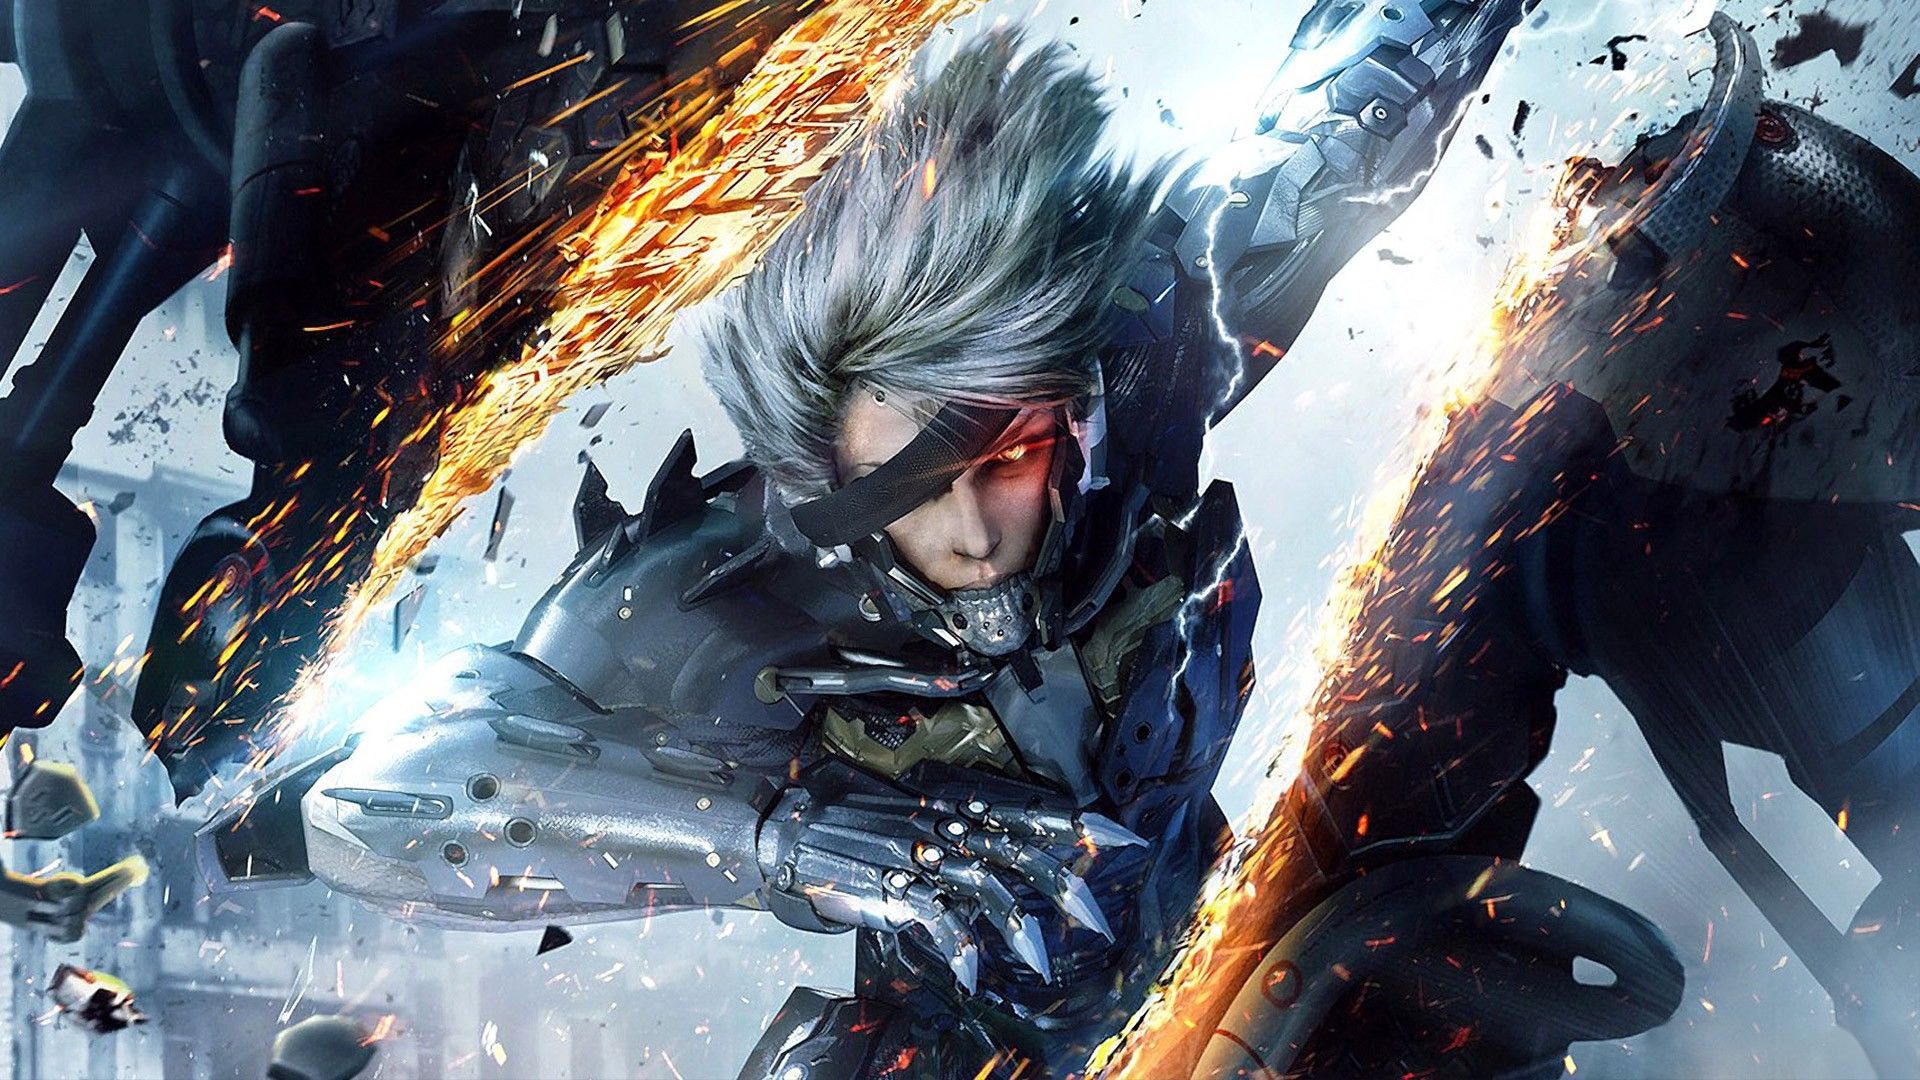 Amazing Metal Gear Rising Pictures & Backgrounds